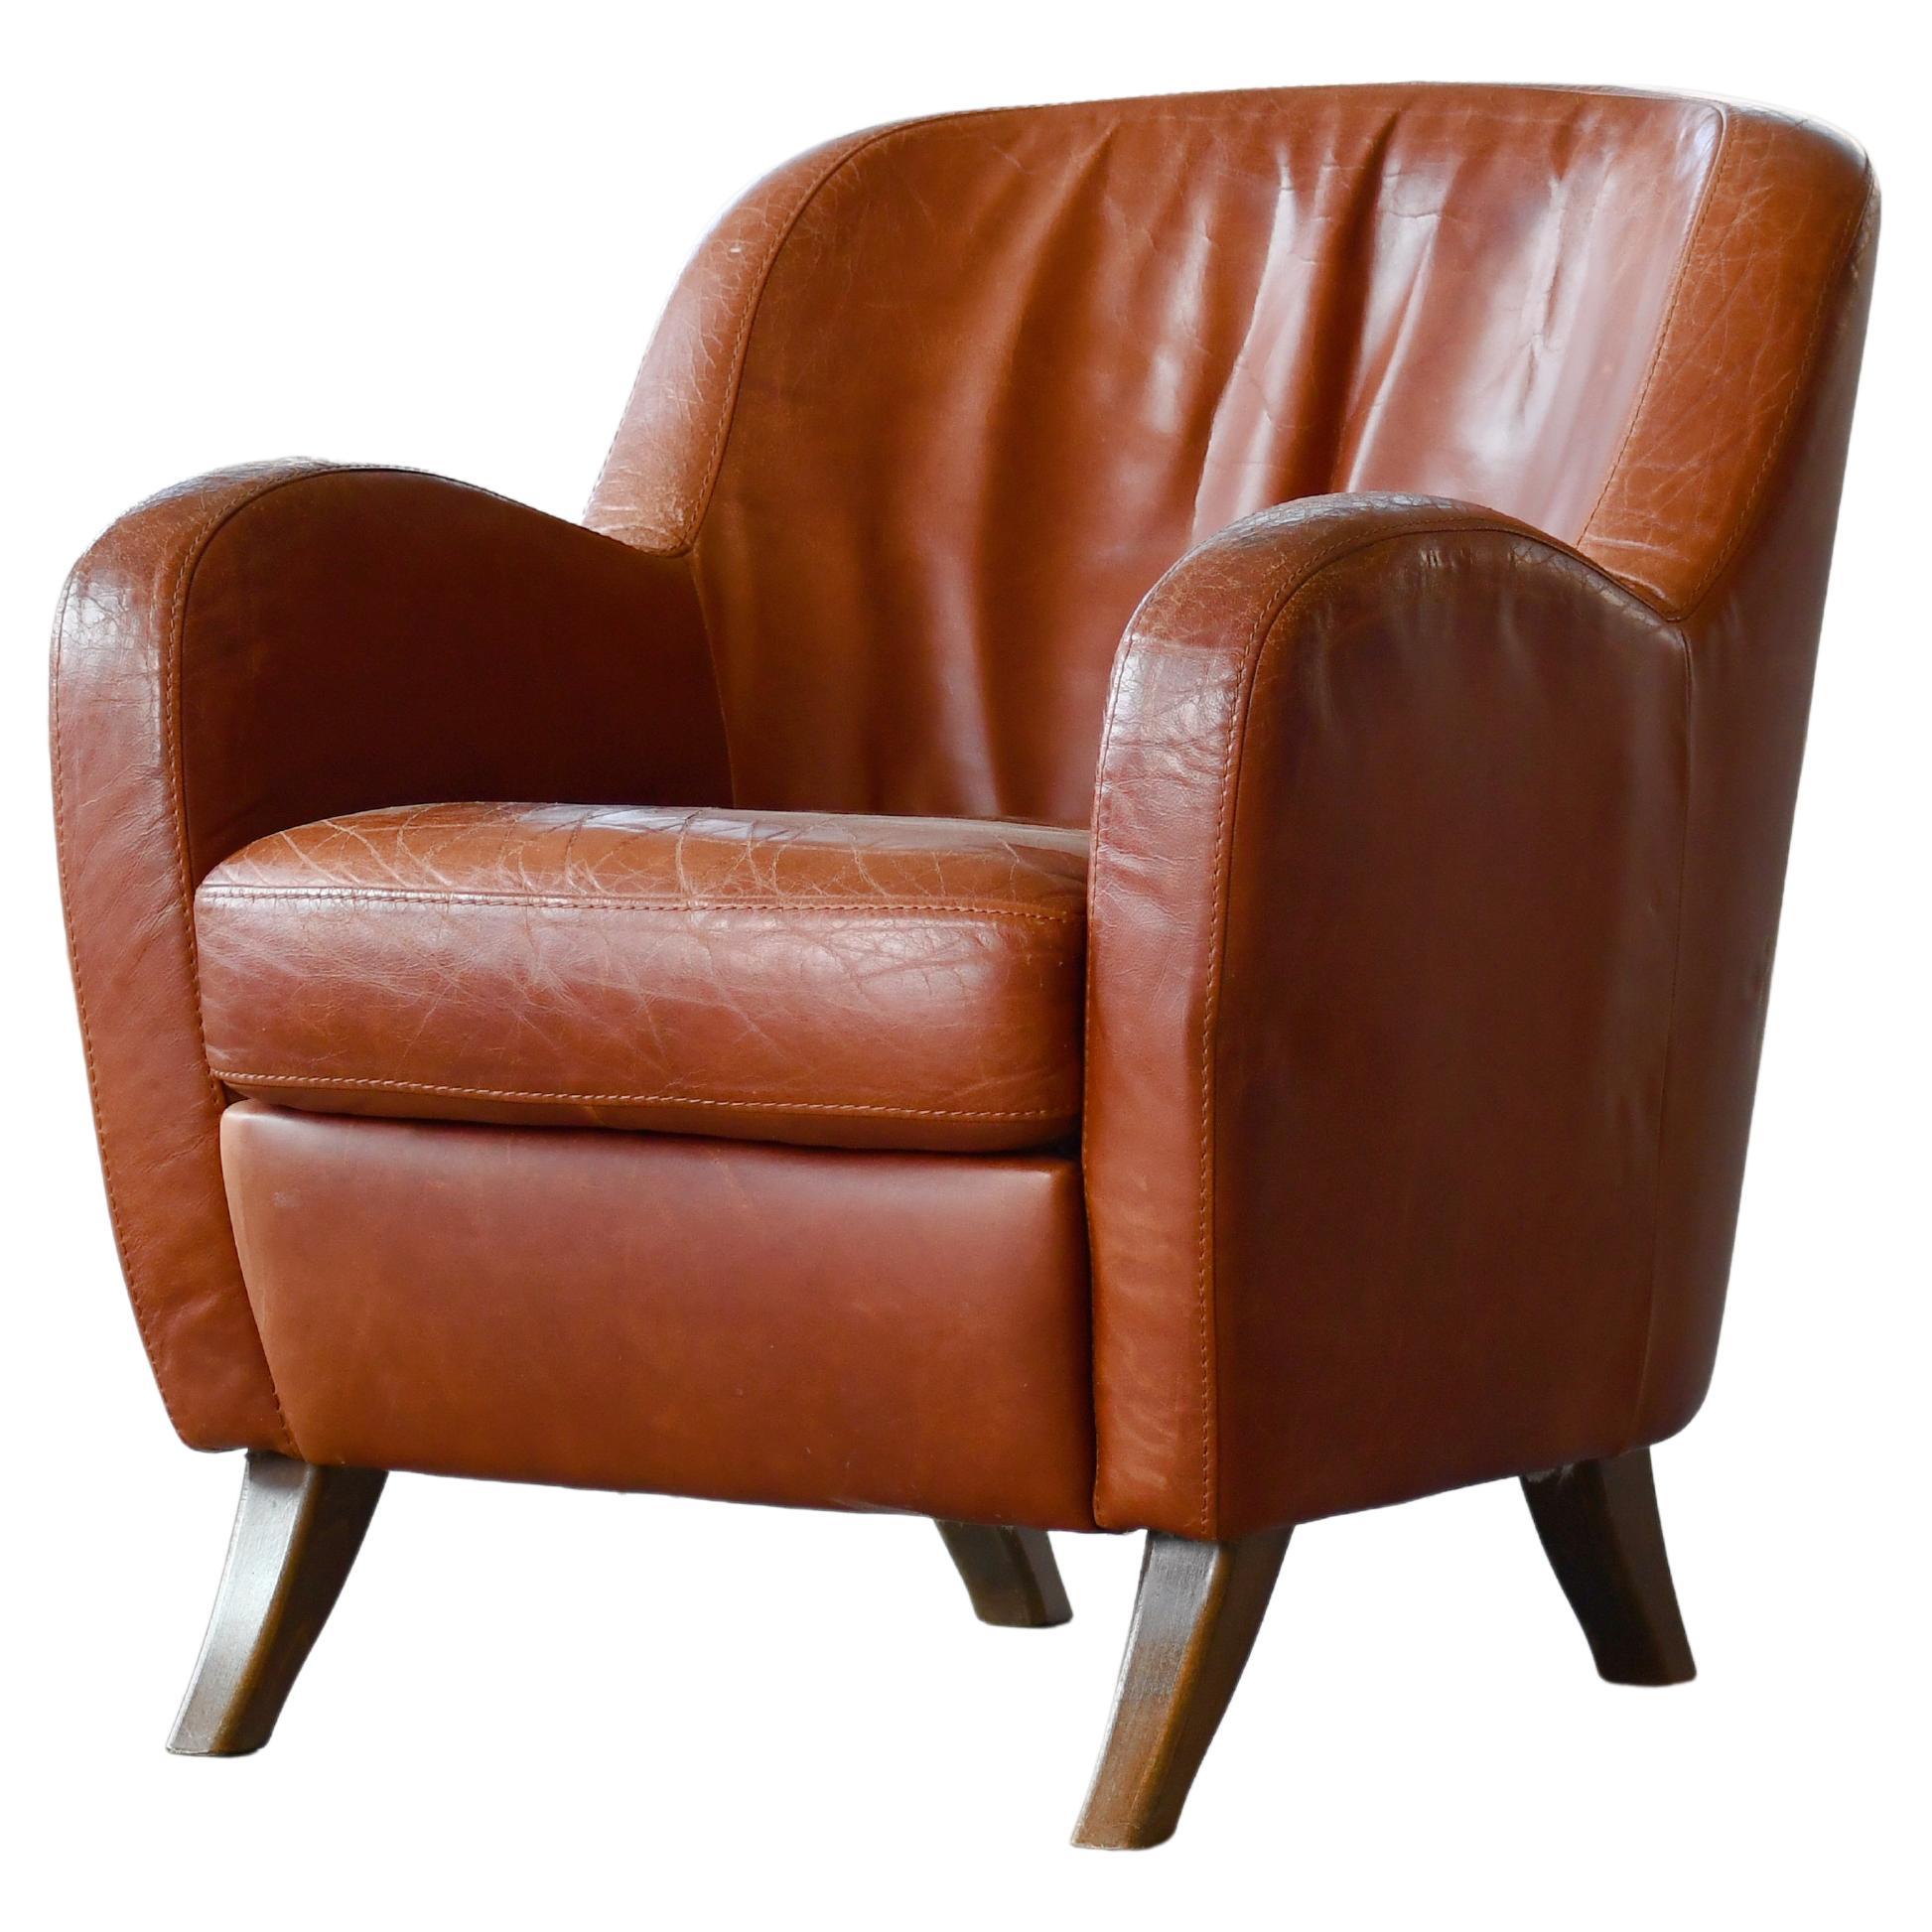 Danish Modern Leather Lounge Chair in the style of Berga Mobler  For Sale